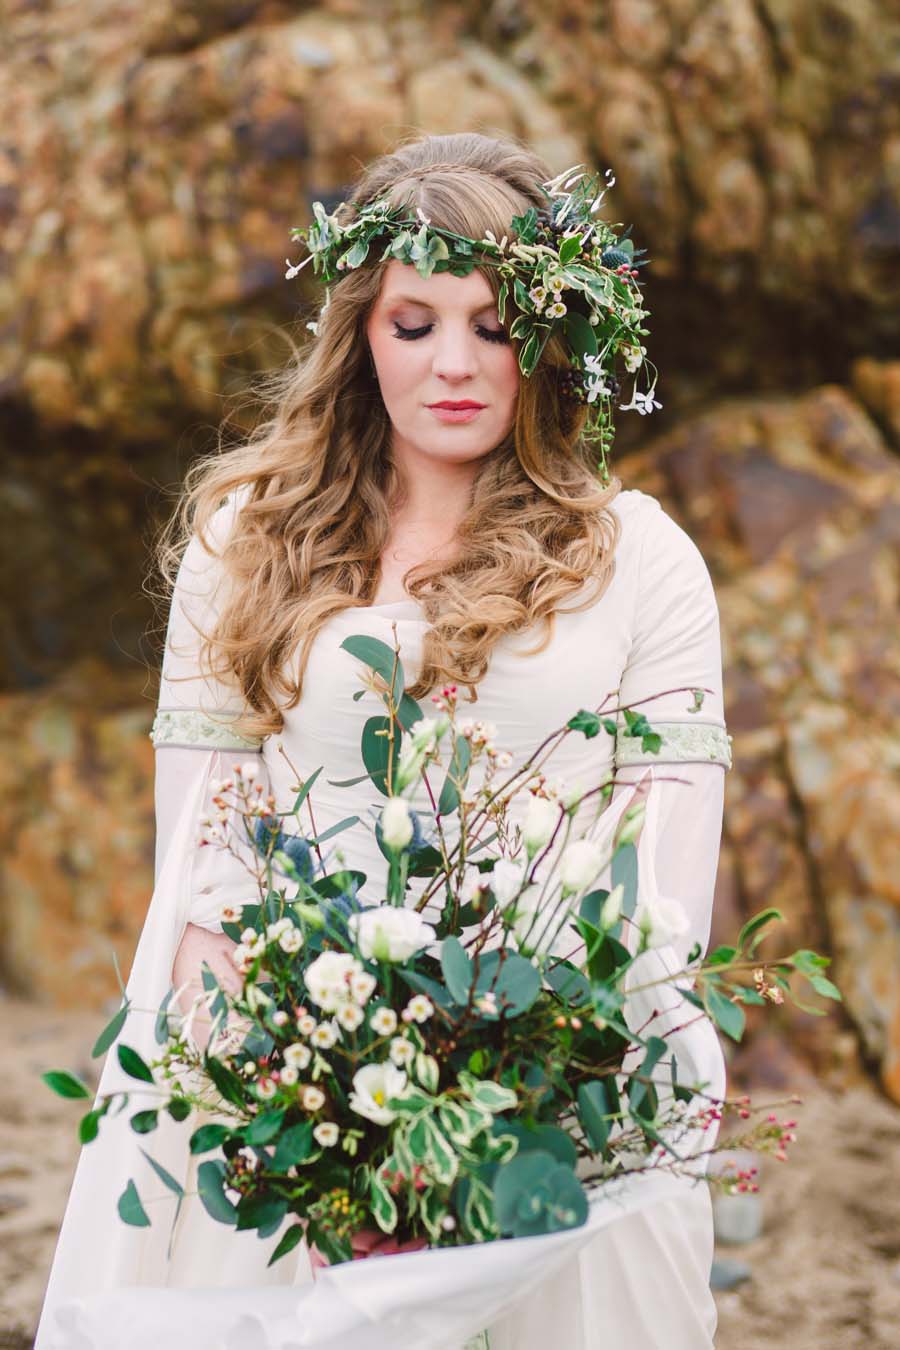 Bridal Editorial On The Coast With A Beautiful Celtic Wedding Dress 21 